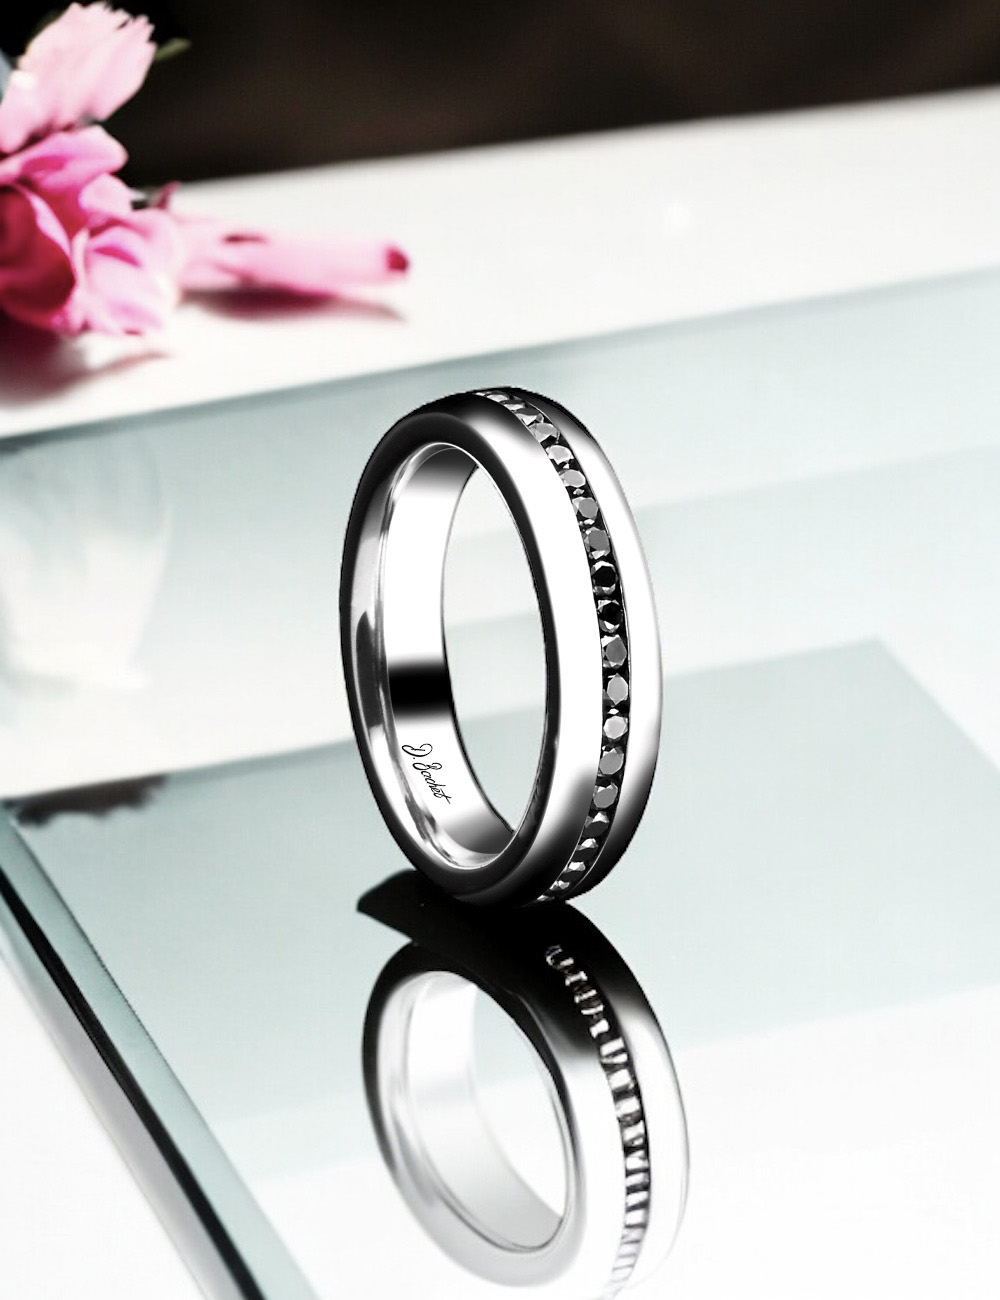 D.Bachet men's wedding band in platinum and gold with black diamonds, bespoke French jewelry.